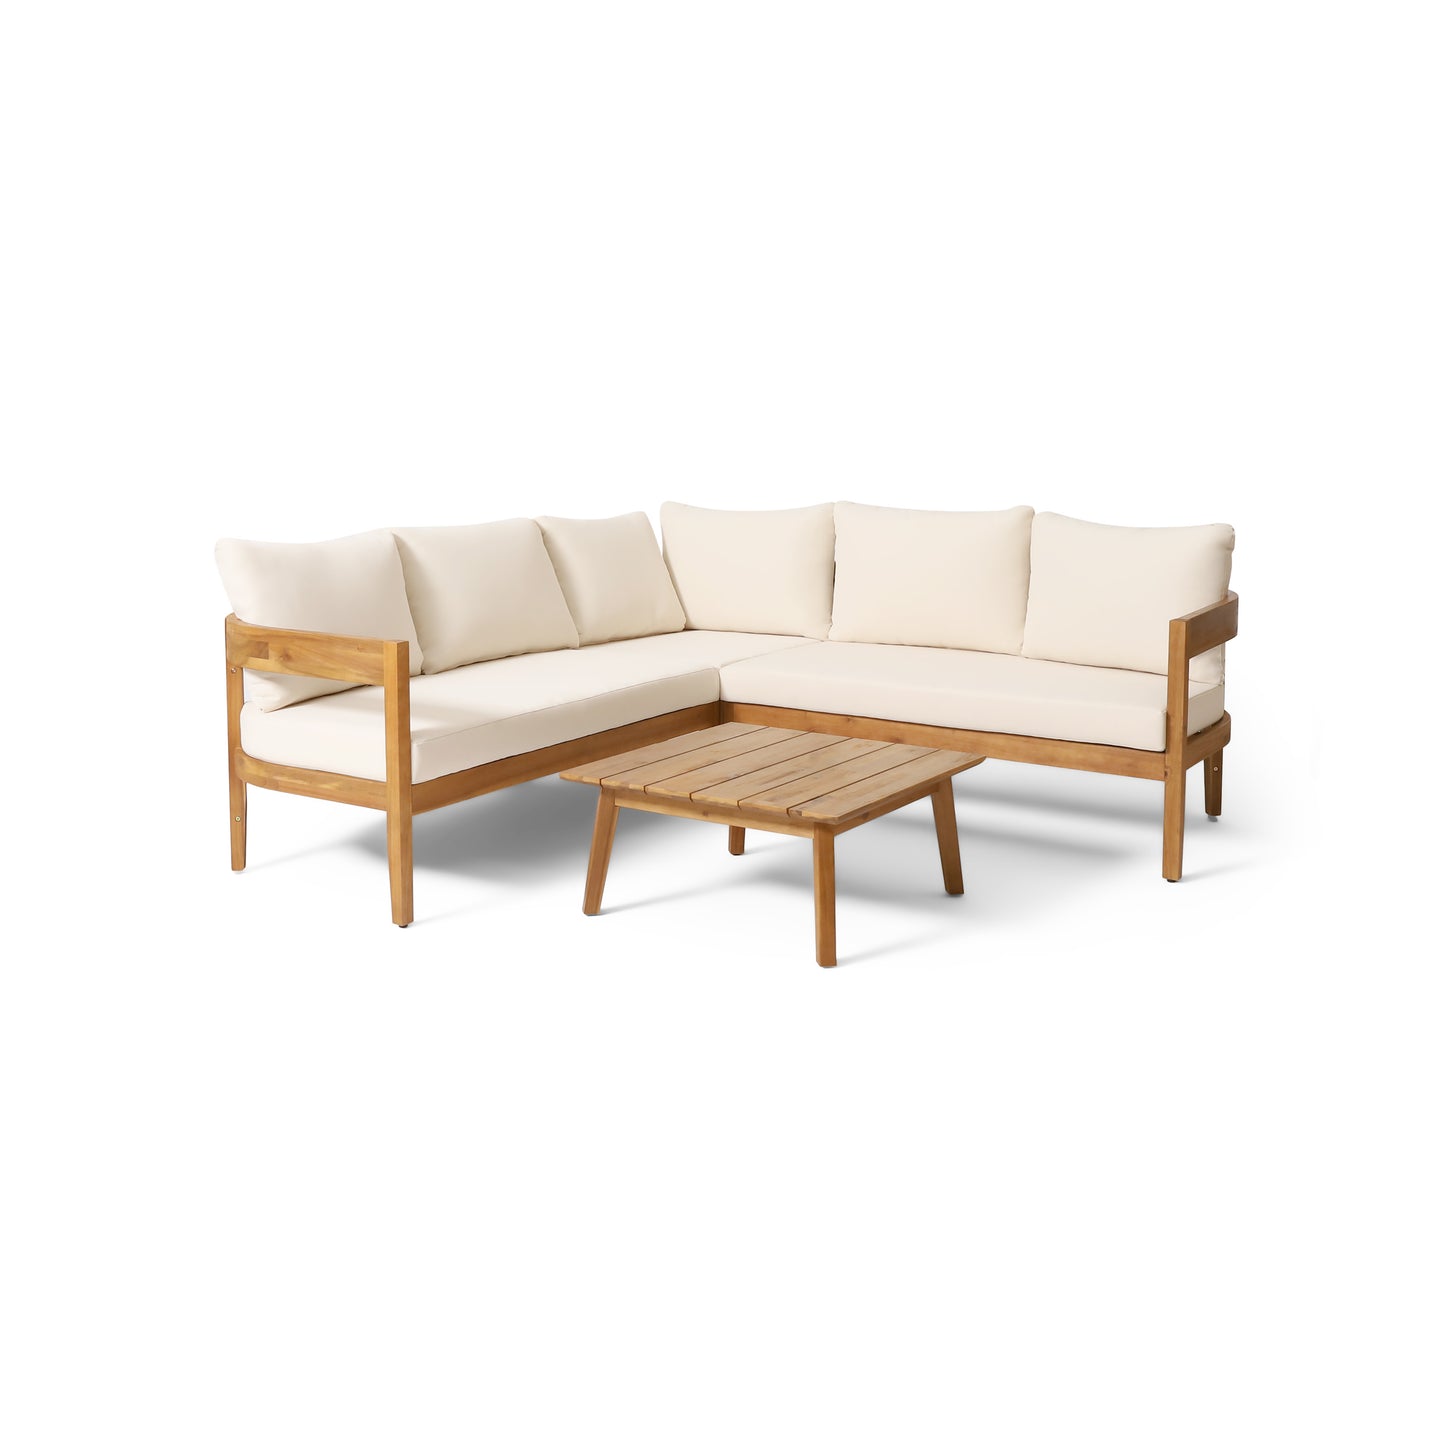 Brooklyn Outdoor Acacia Wood 5 Seater Sectional Sofa Chat Set with Cushions, Teak and Beige